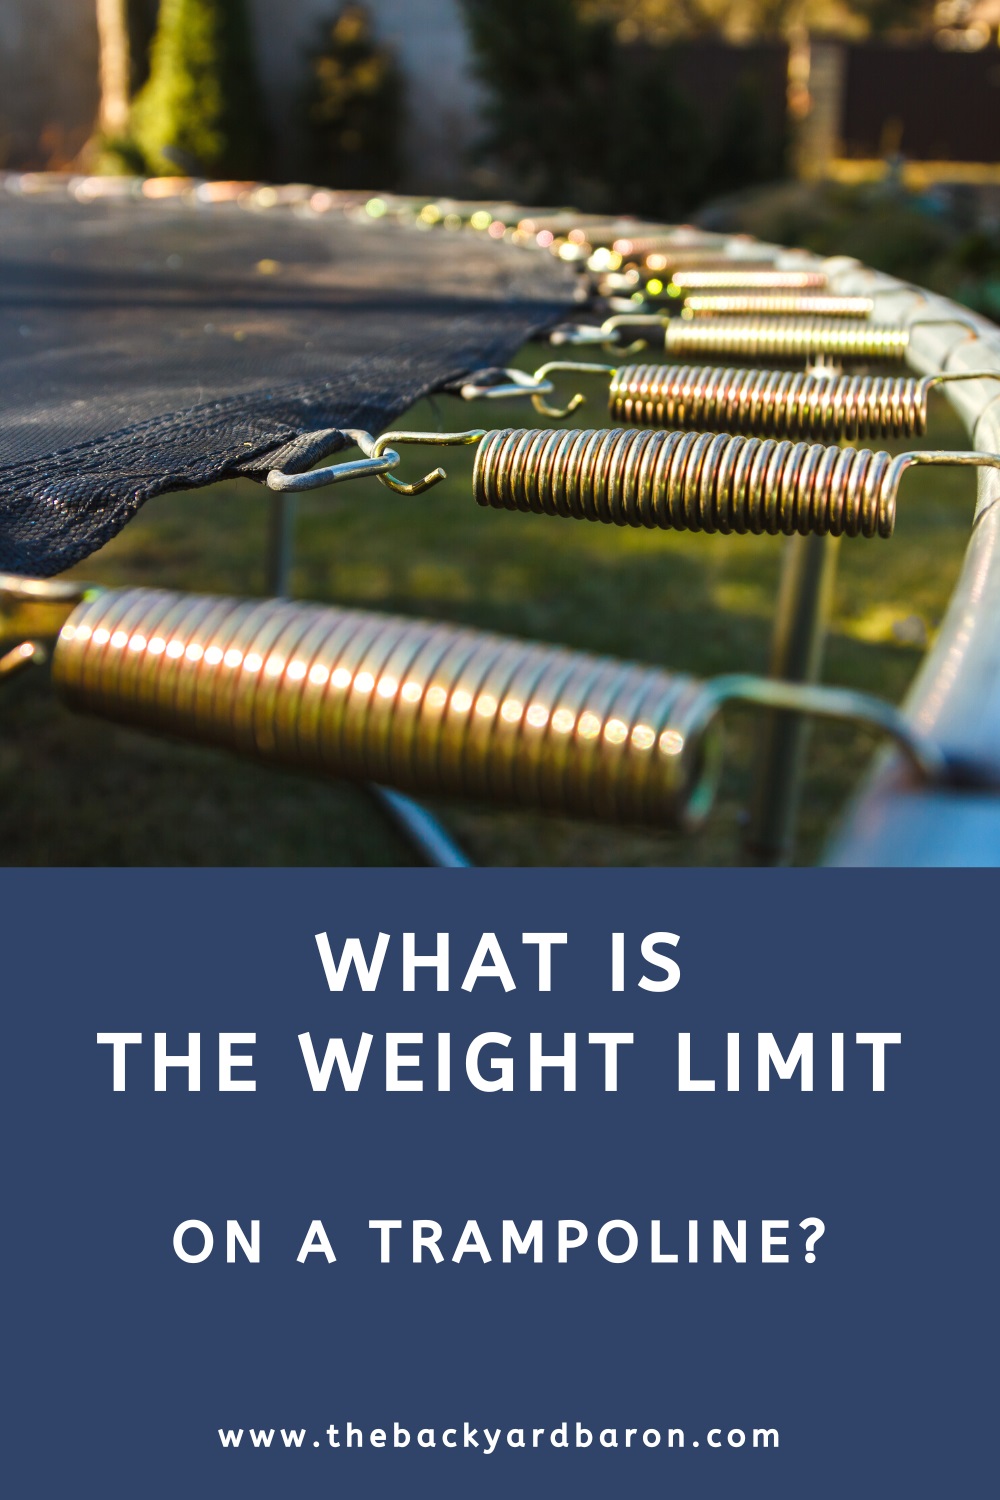 What is the weight limit on a trampoline?